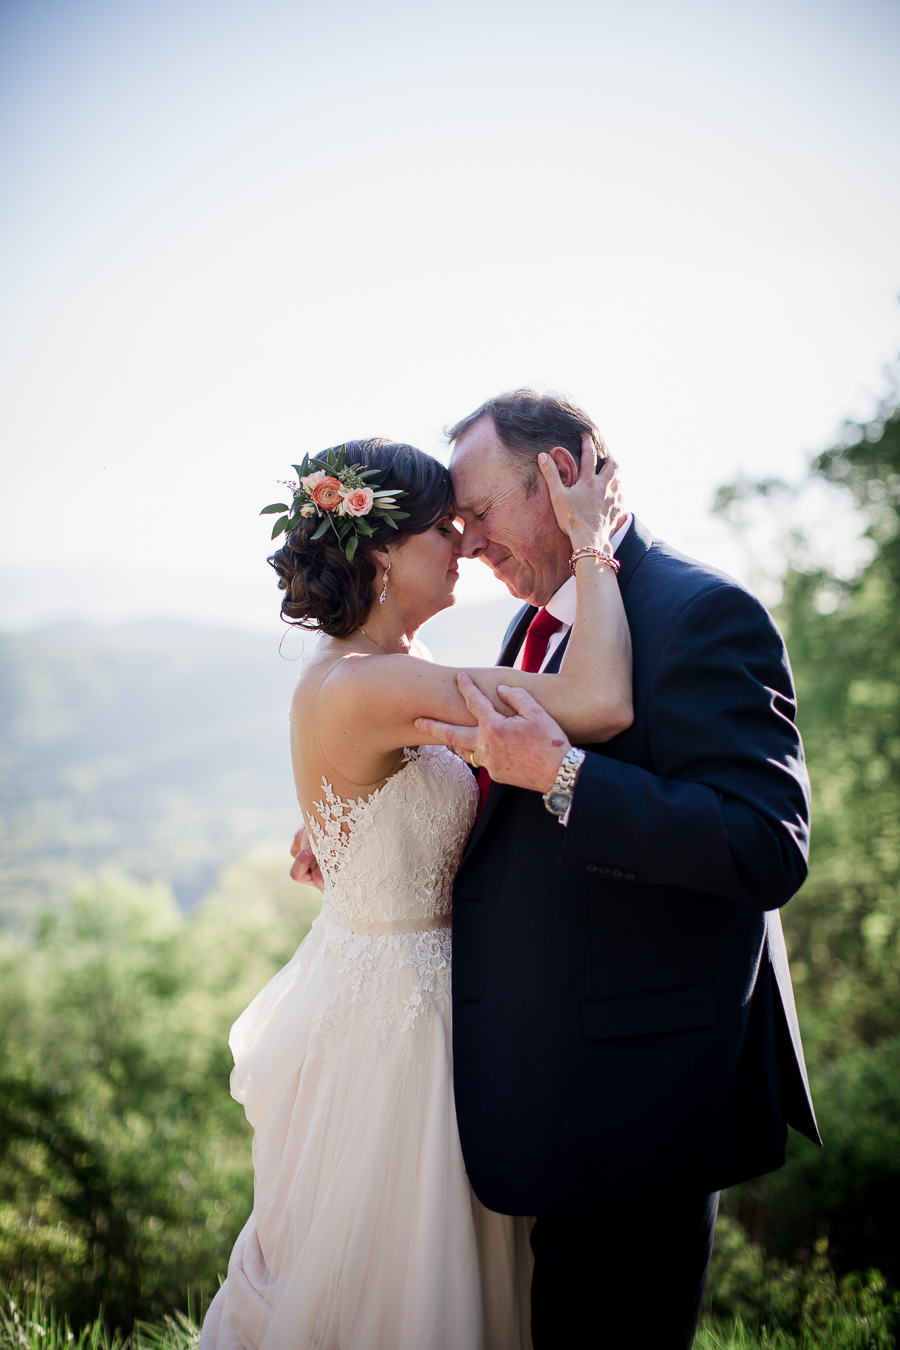 Bride and Father foreheads touching at this North Carolina Elopement by Knoxville Wedding Photographer, Amanda May Photos.